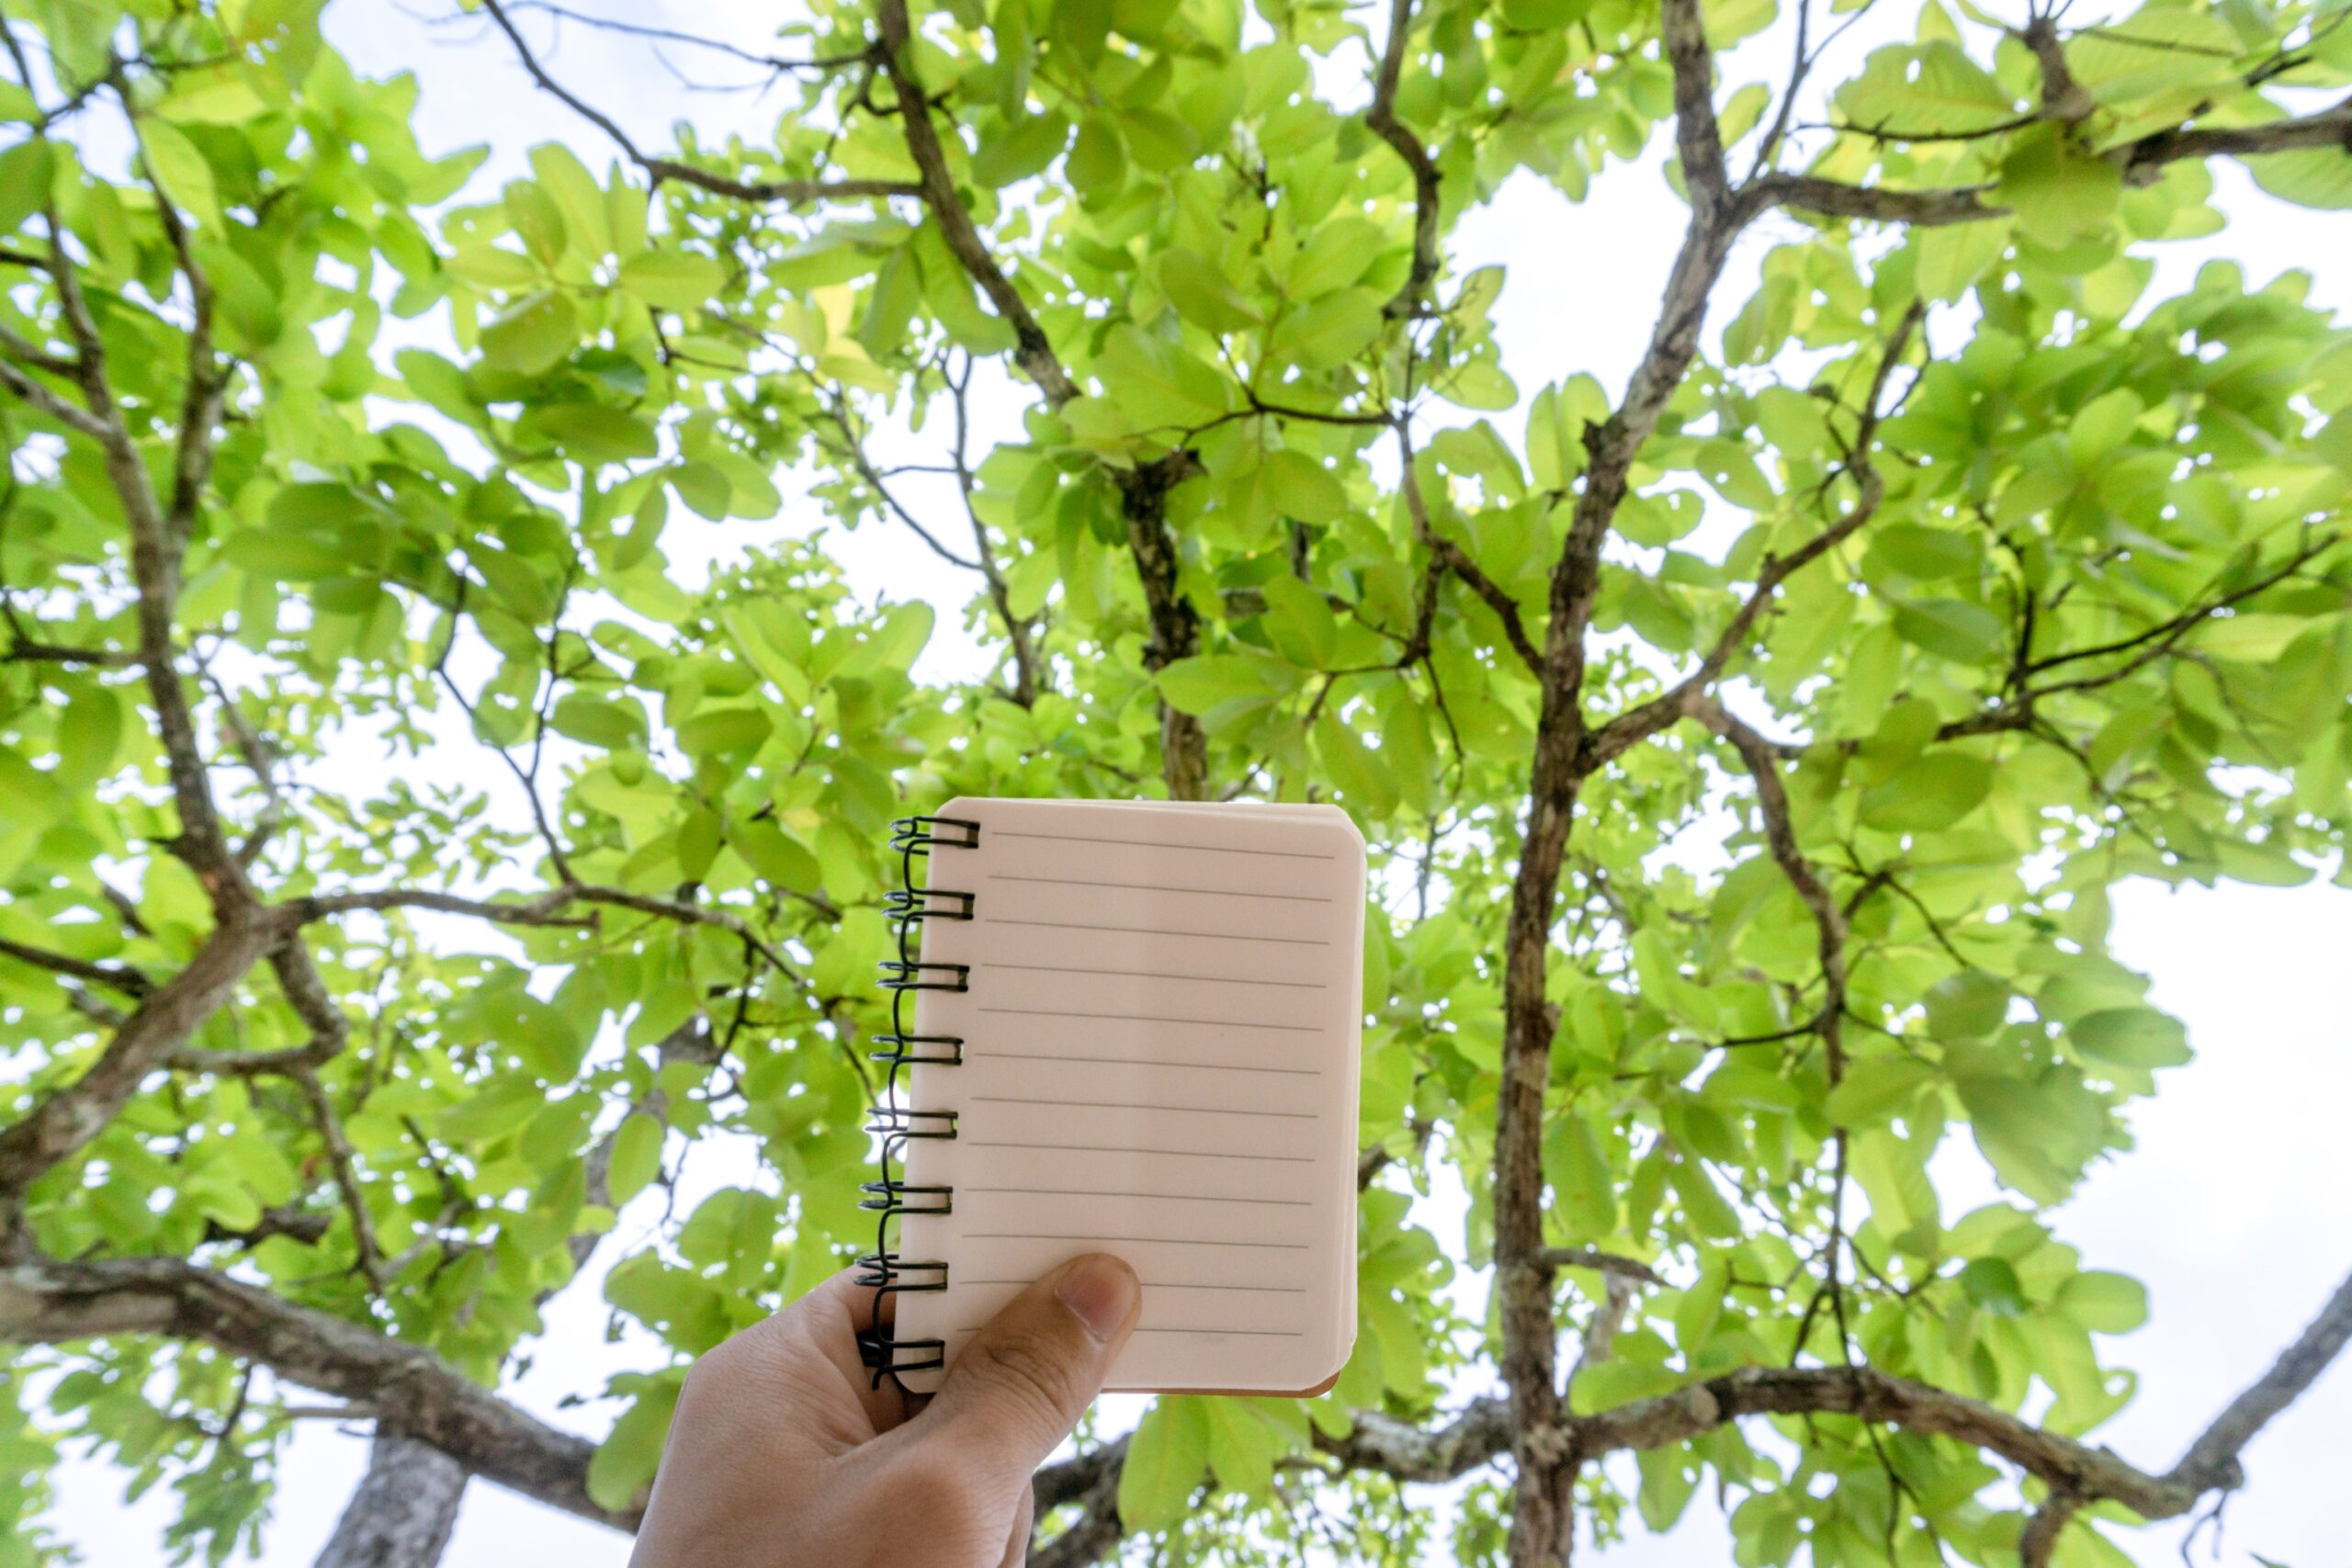 Seasonal Tree Care Calendar Your Year-Round Guide to Maintaining Healthy Trees